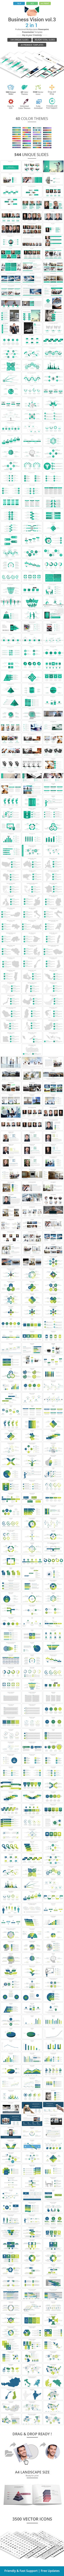 Business vision vol.3 - 2 in 1 PowerPoint Template Bundle